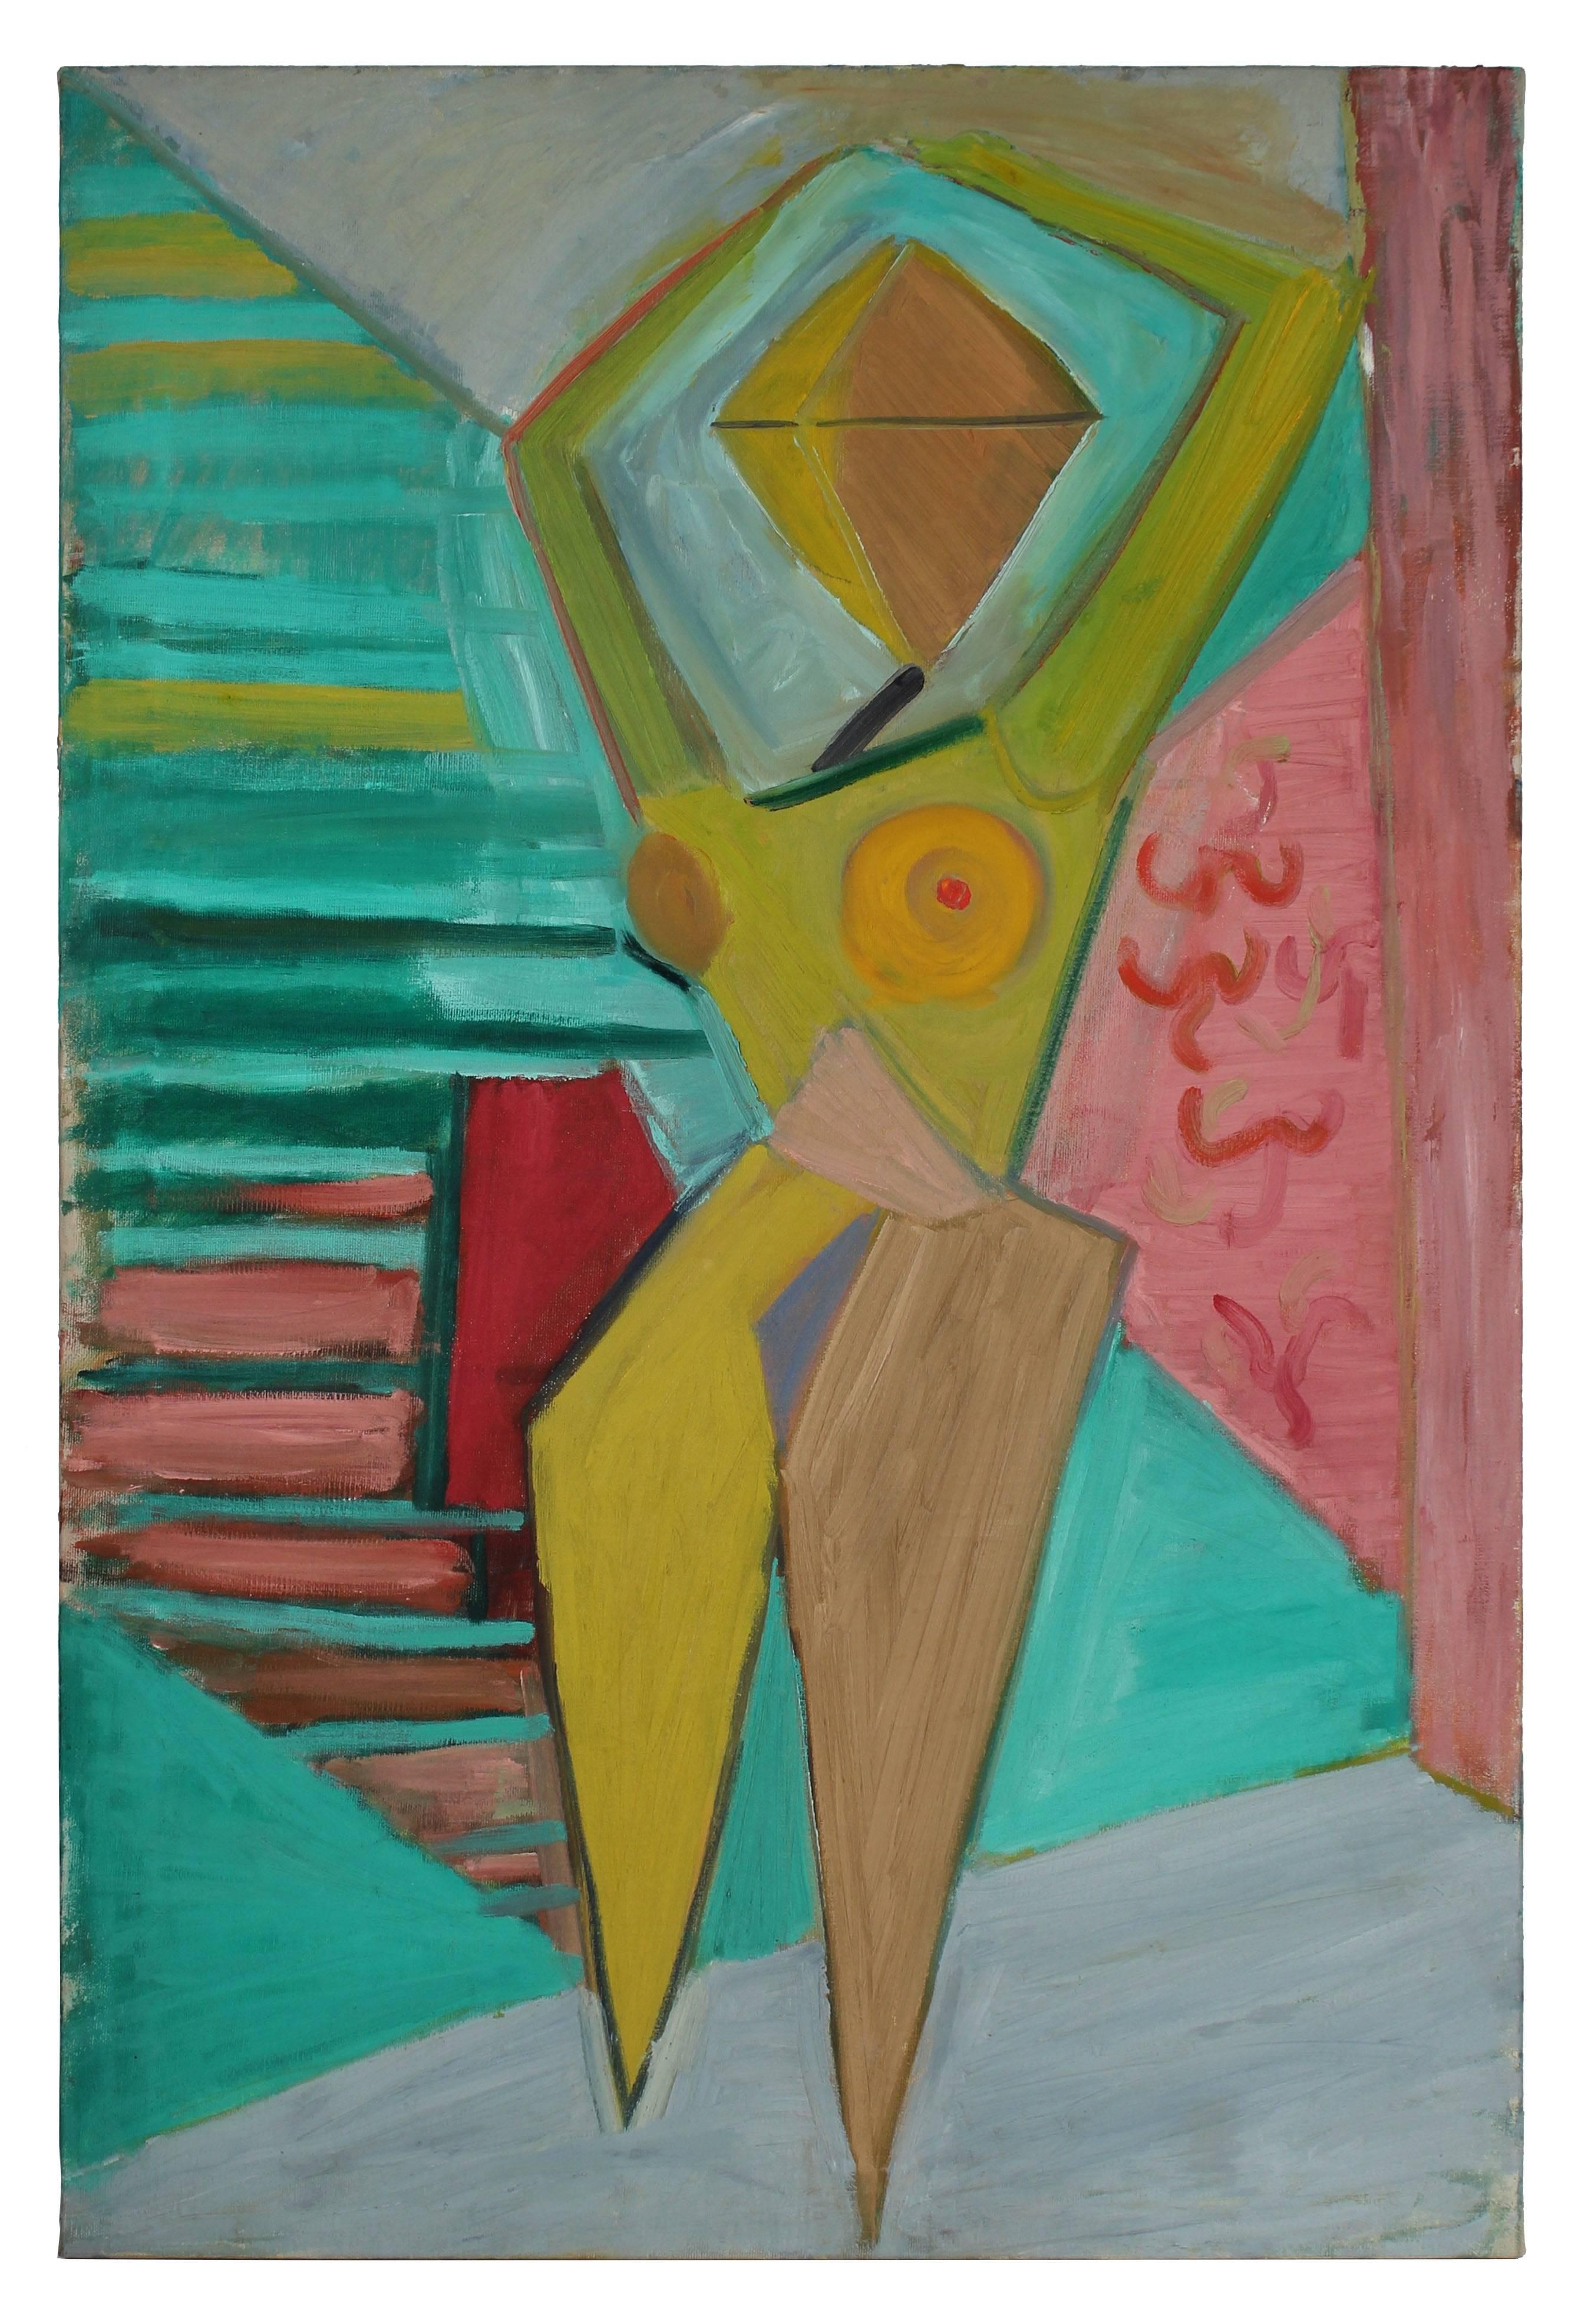 Michael L. Mason Nude Painting - Abstracted Cubist Figure in Oil, Circa Late 1950s